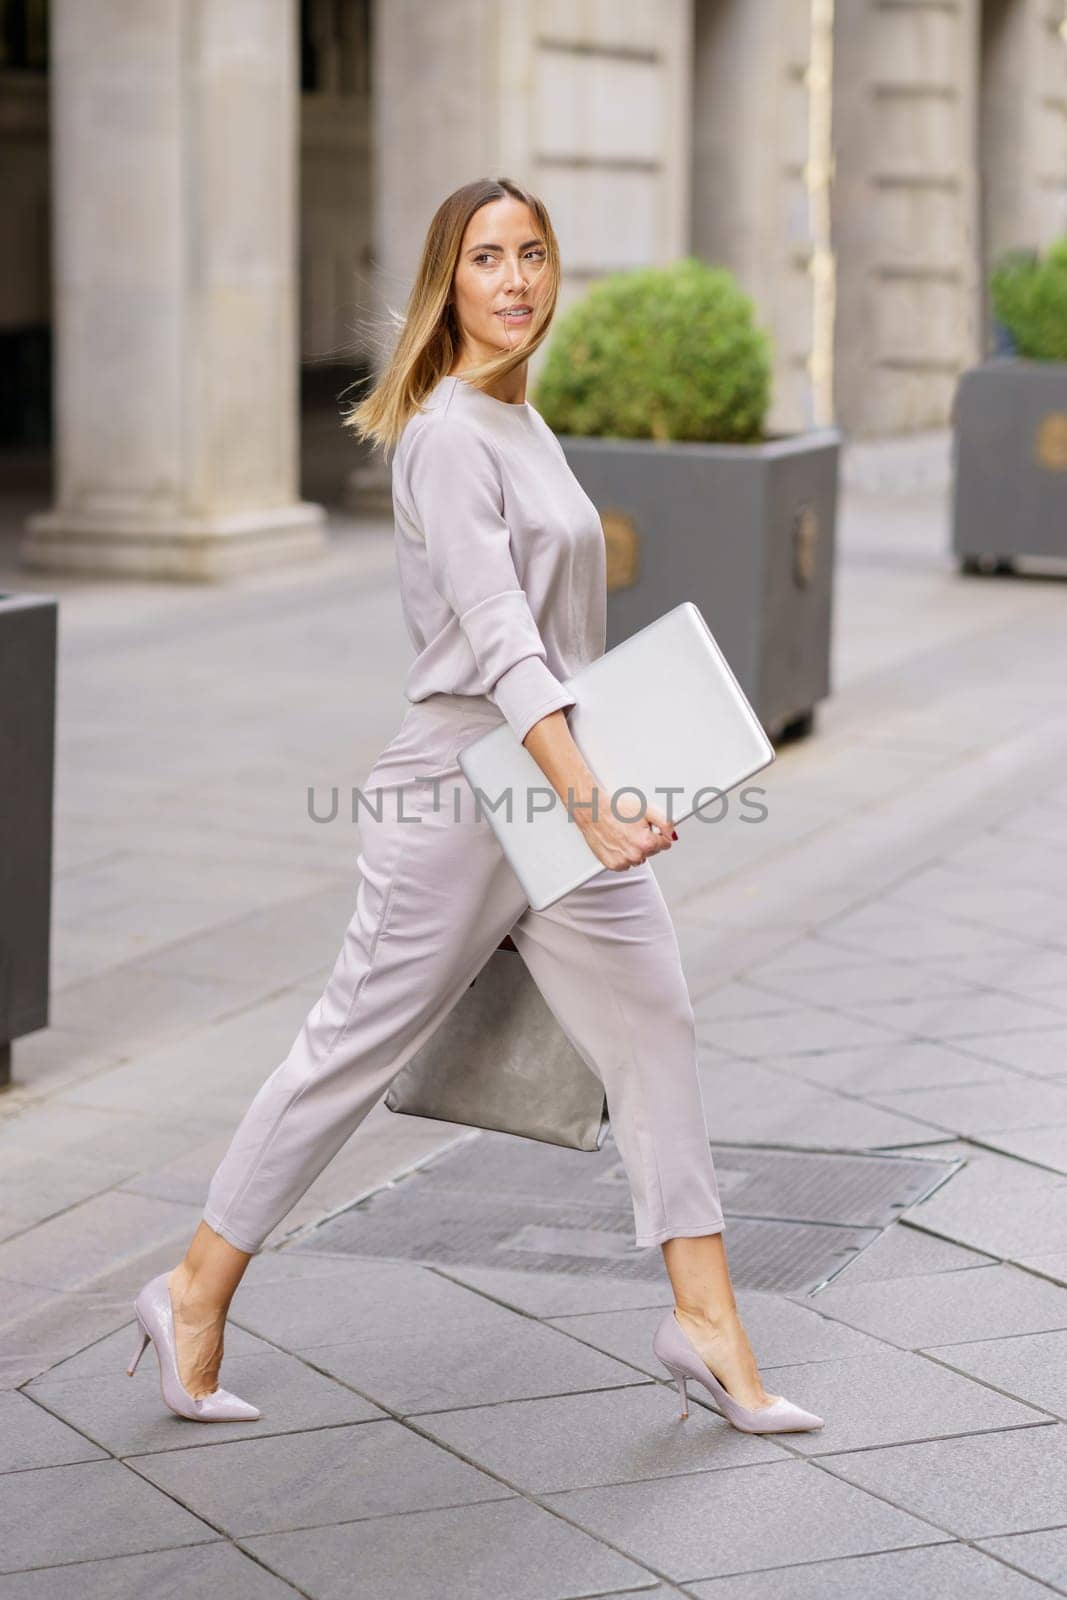 Side view of elegant young feminine businesswoman with long blond hair in stylish outfit, and high heels walking on paved street with laptop in hand and looking away